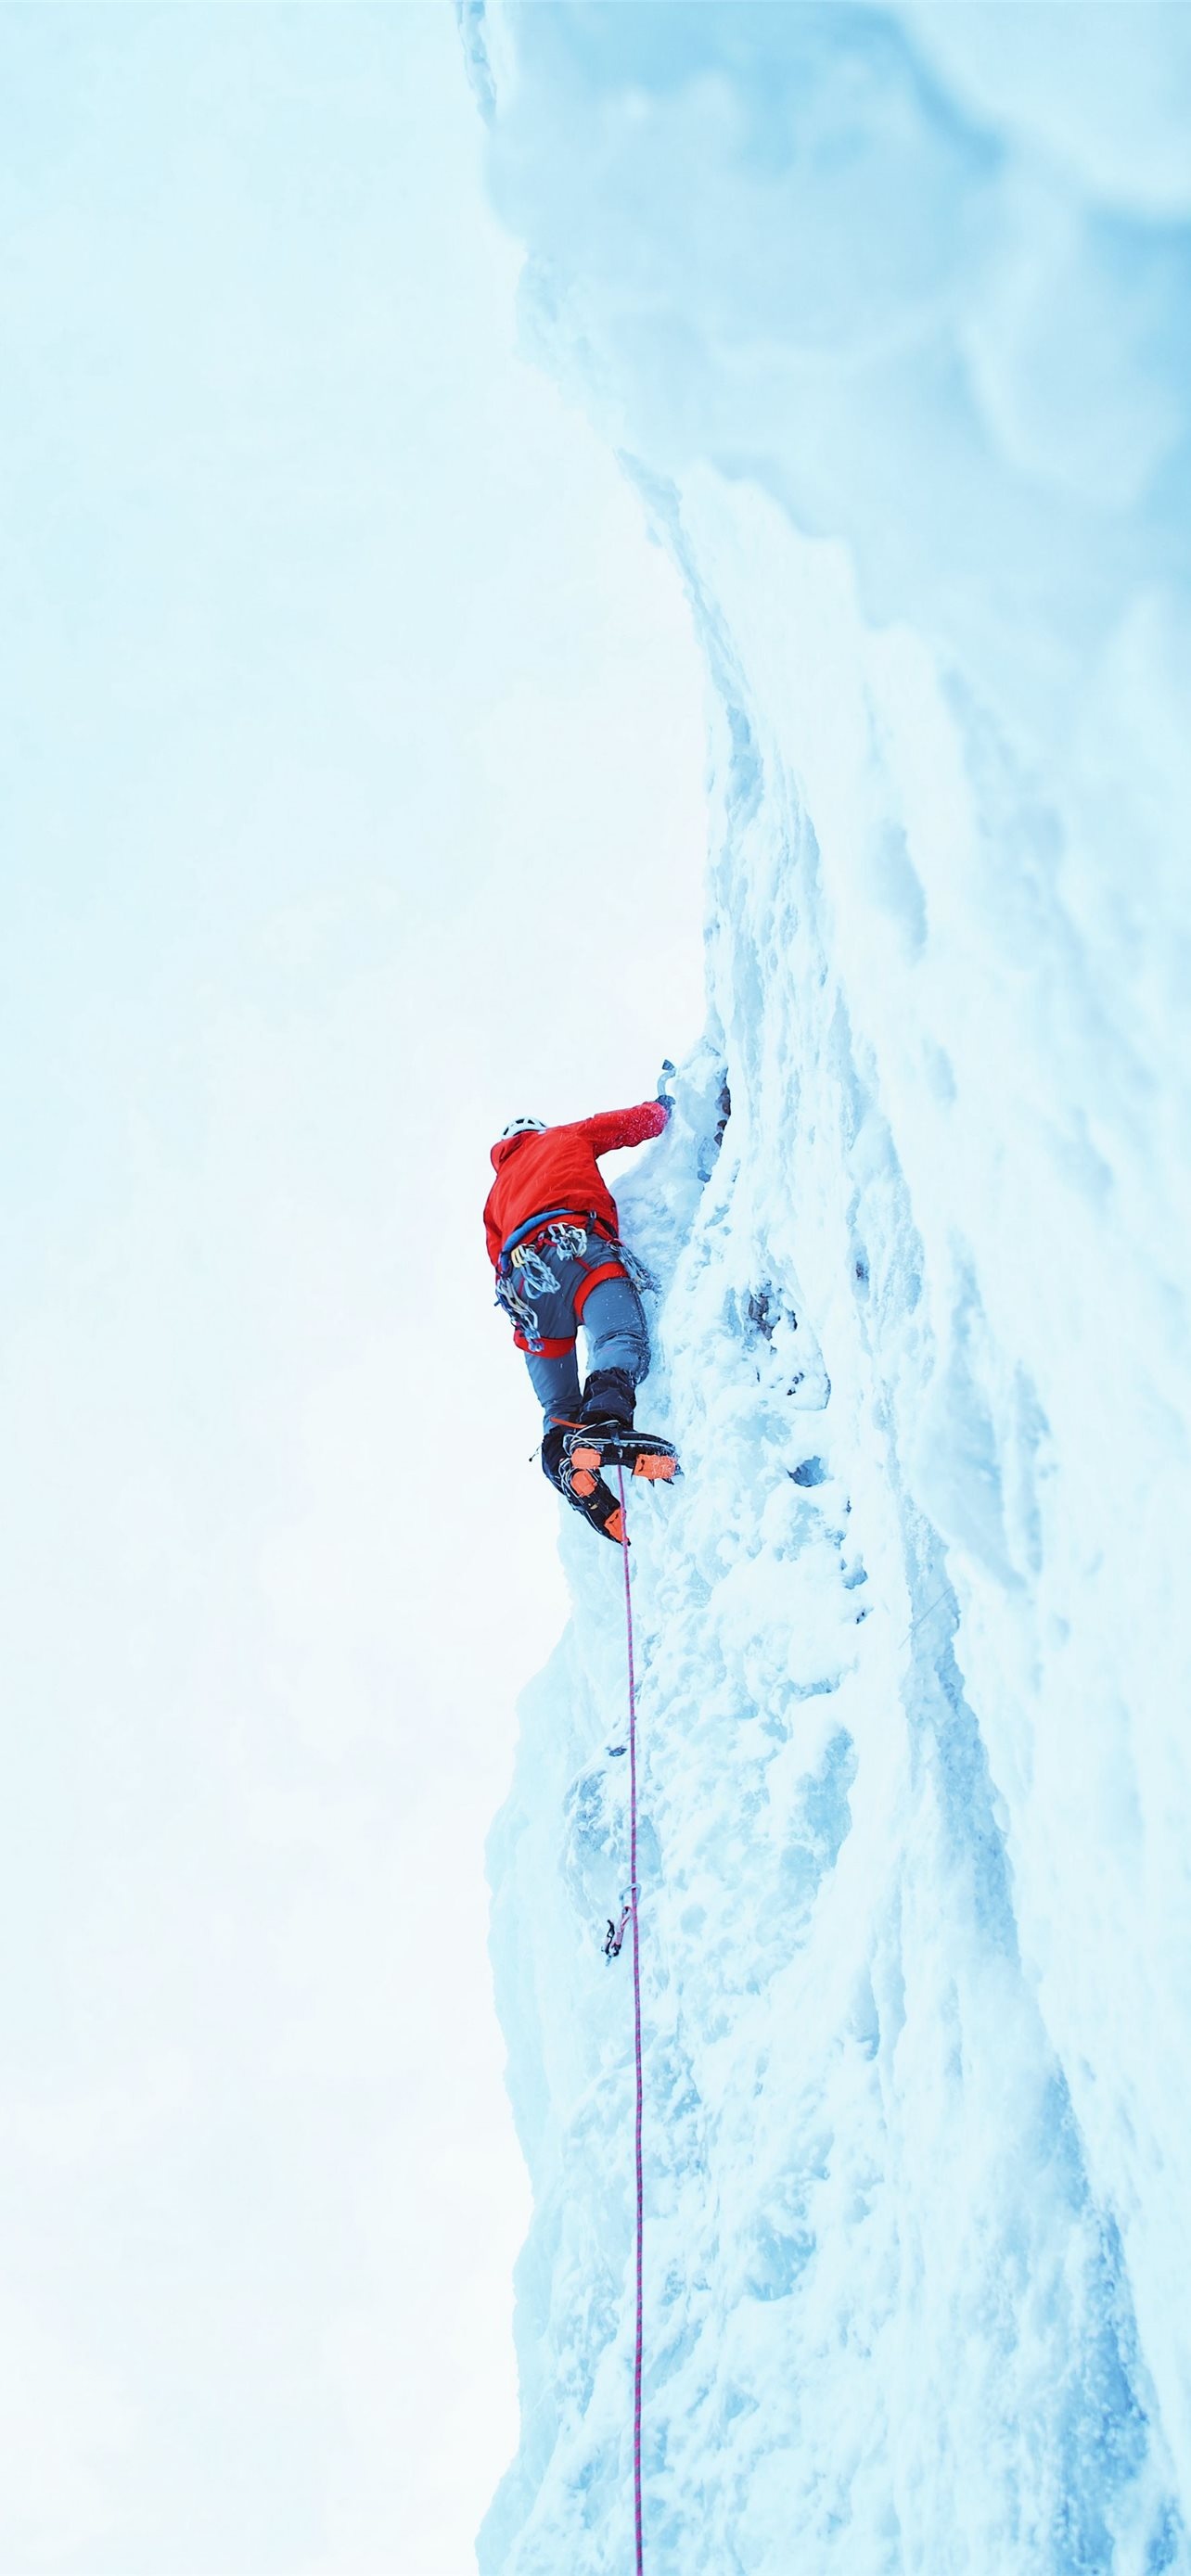 Ice Climbing: Snow Mountain Climber In Action, Intense Physical Outdoor Activities In Winter, Climbers' Popular Destinations, Rjukan, Norway. 1290x2780 HD Background.